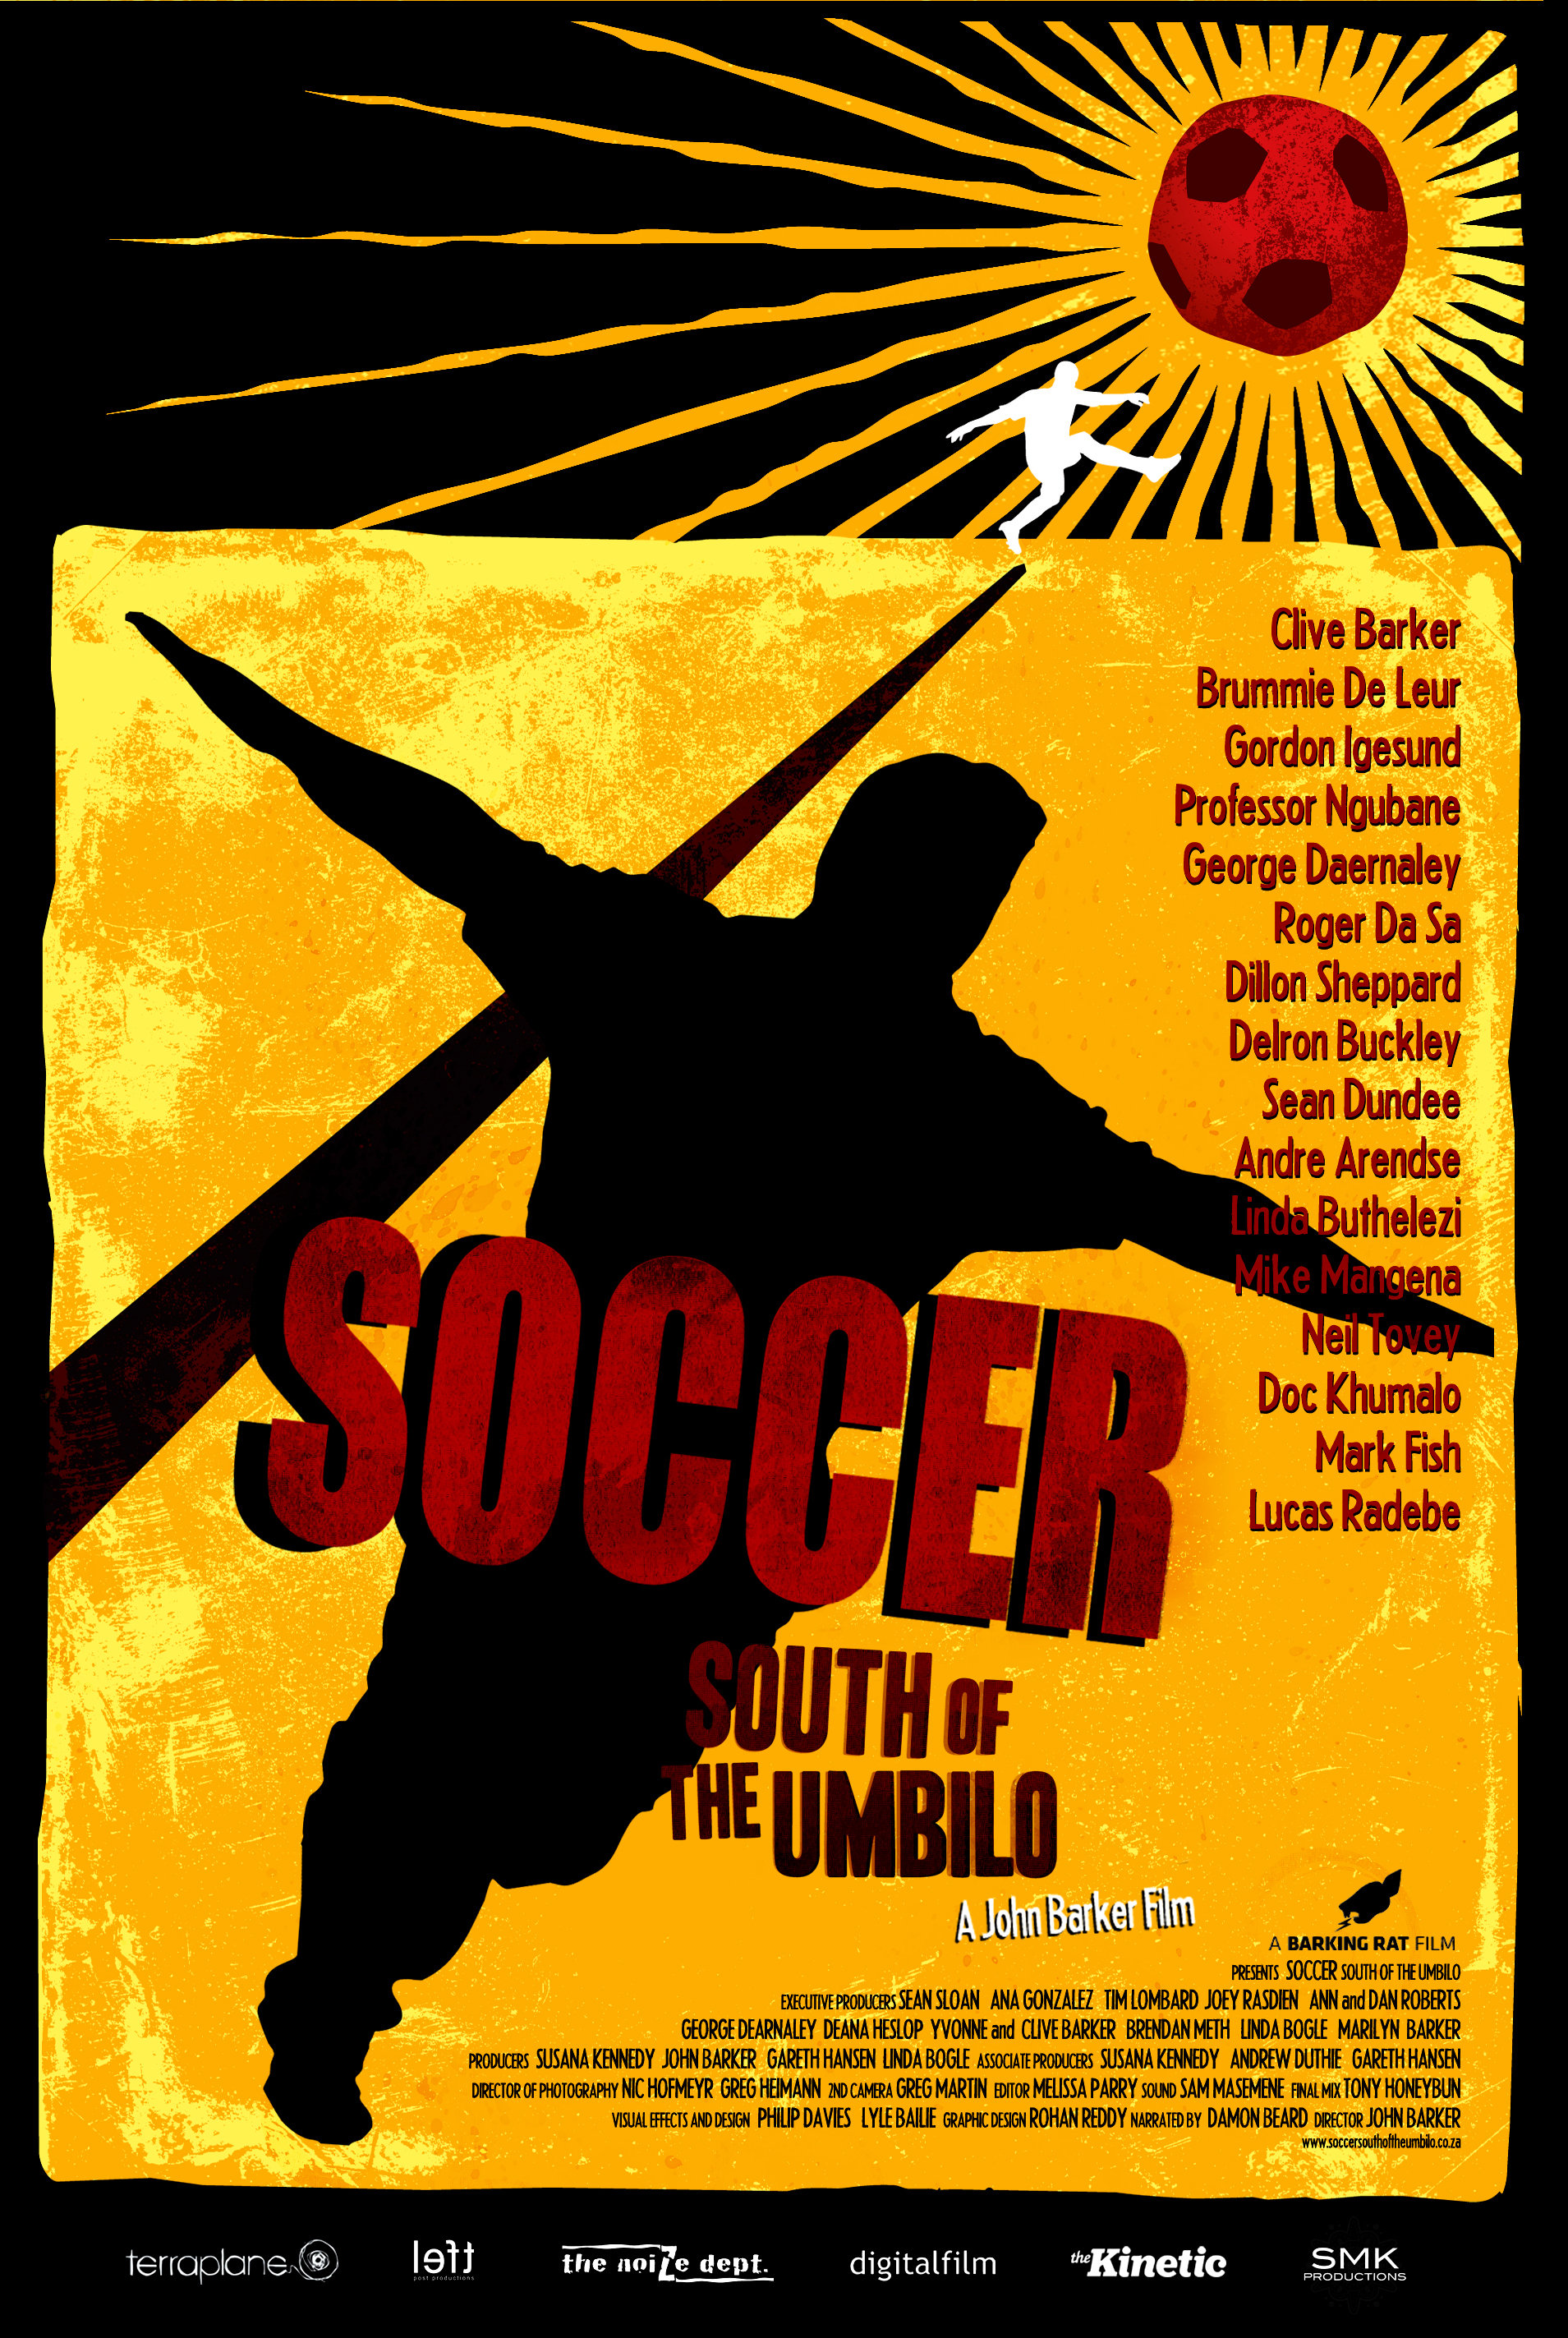 Soccer: South of the Umbilo